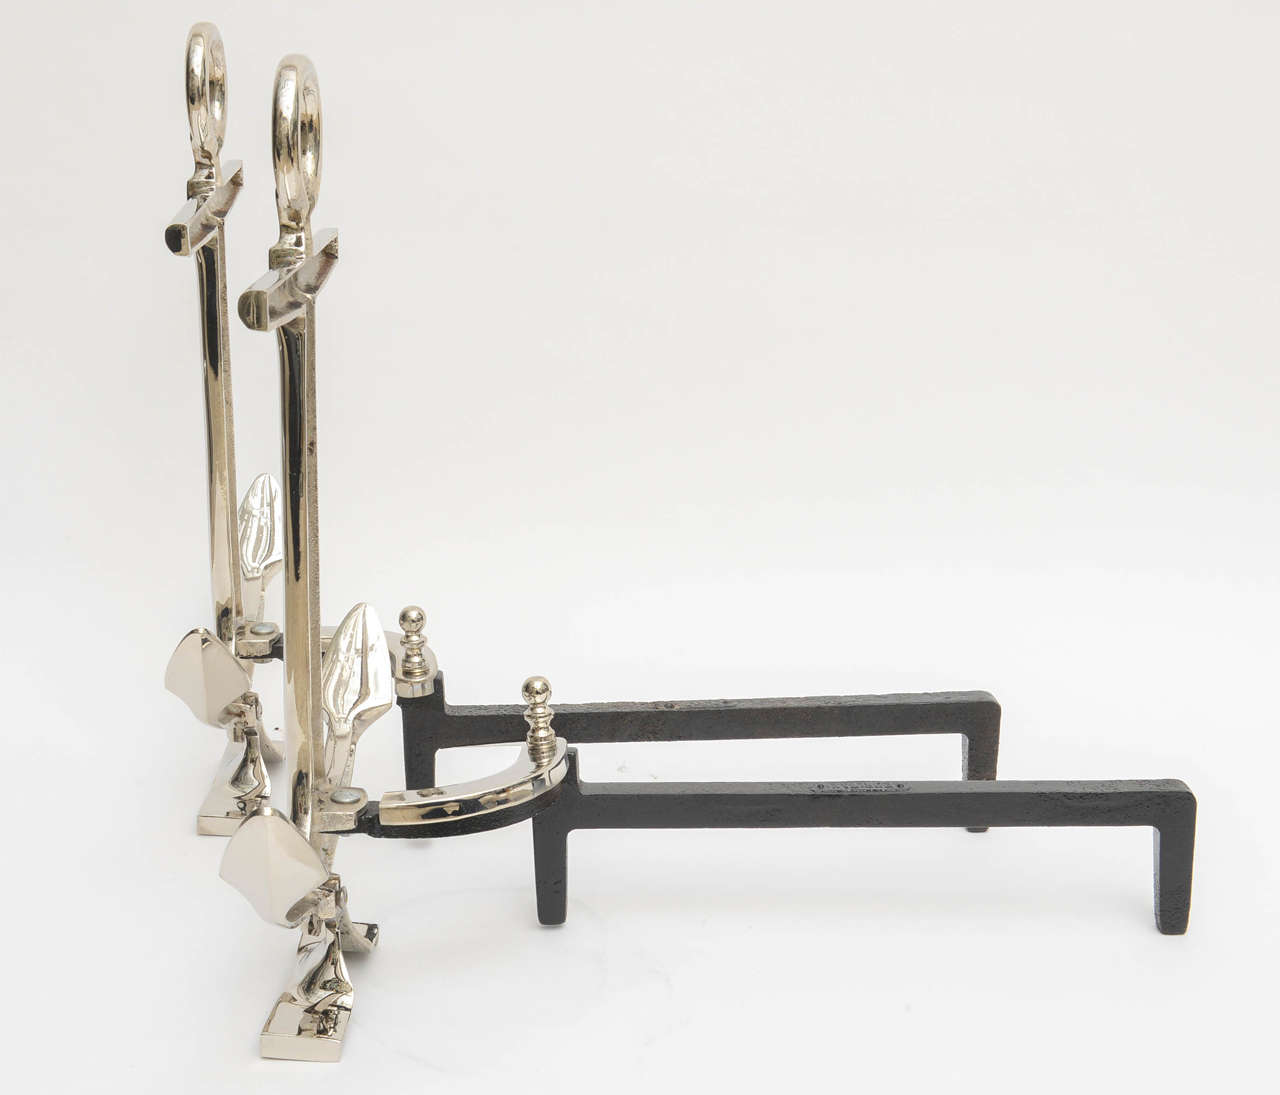 Iron Pair of Nickel-Plated Anchor-Form Andirons by Puritan